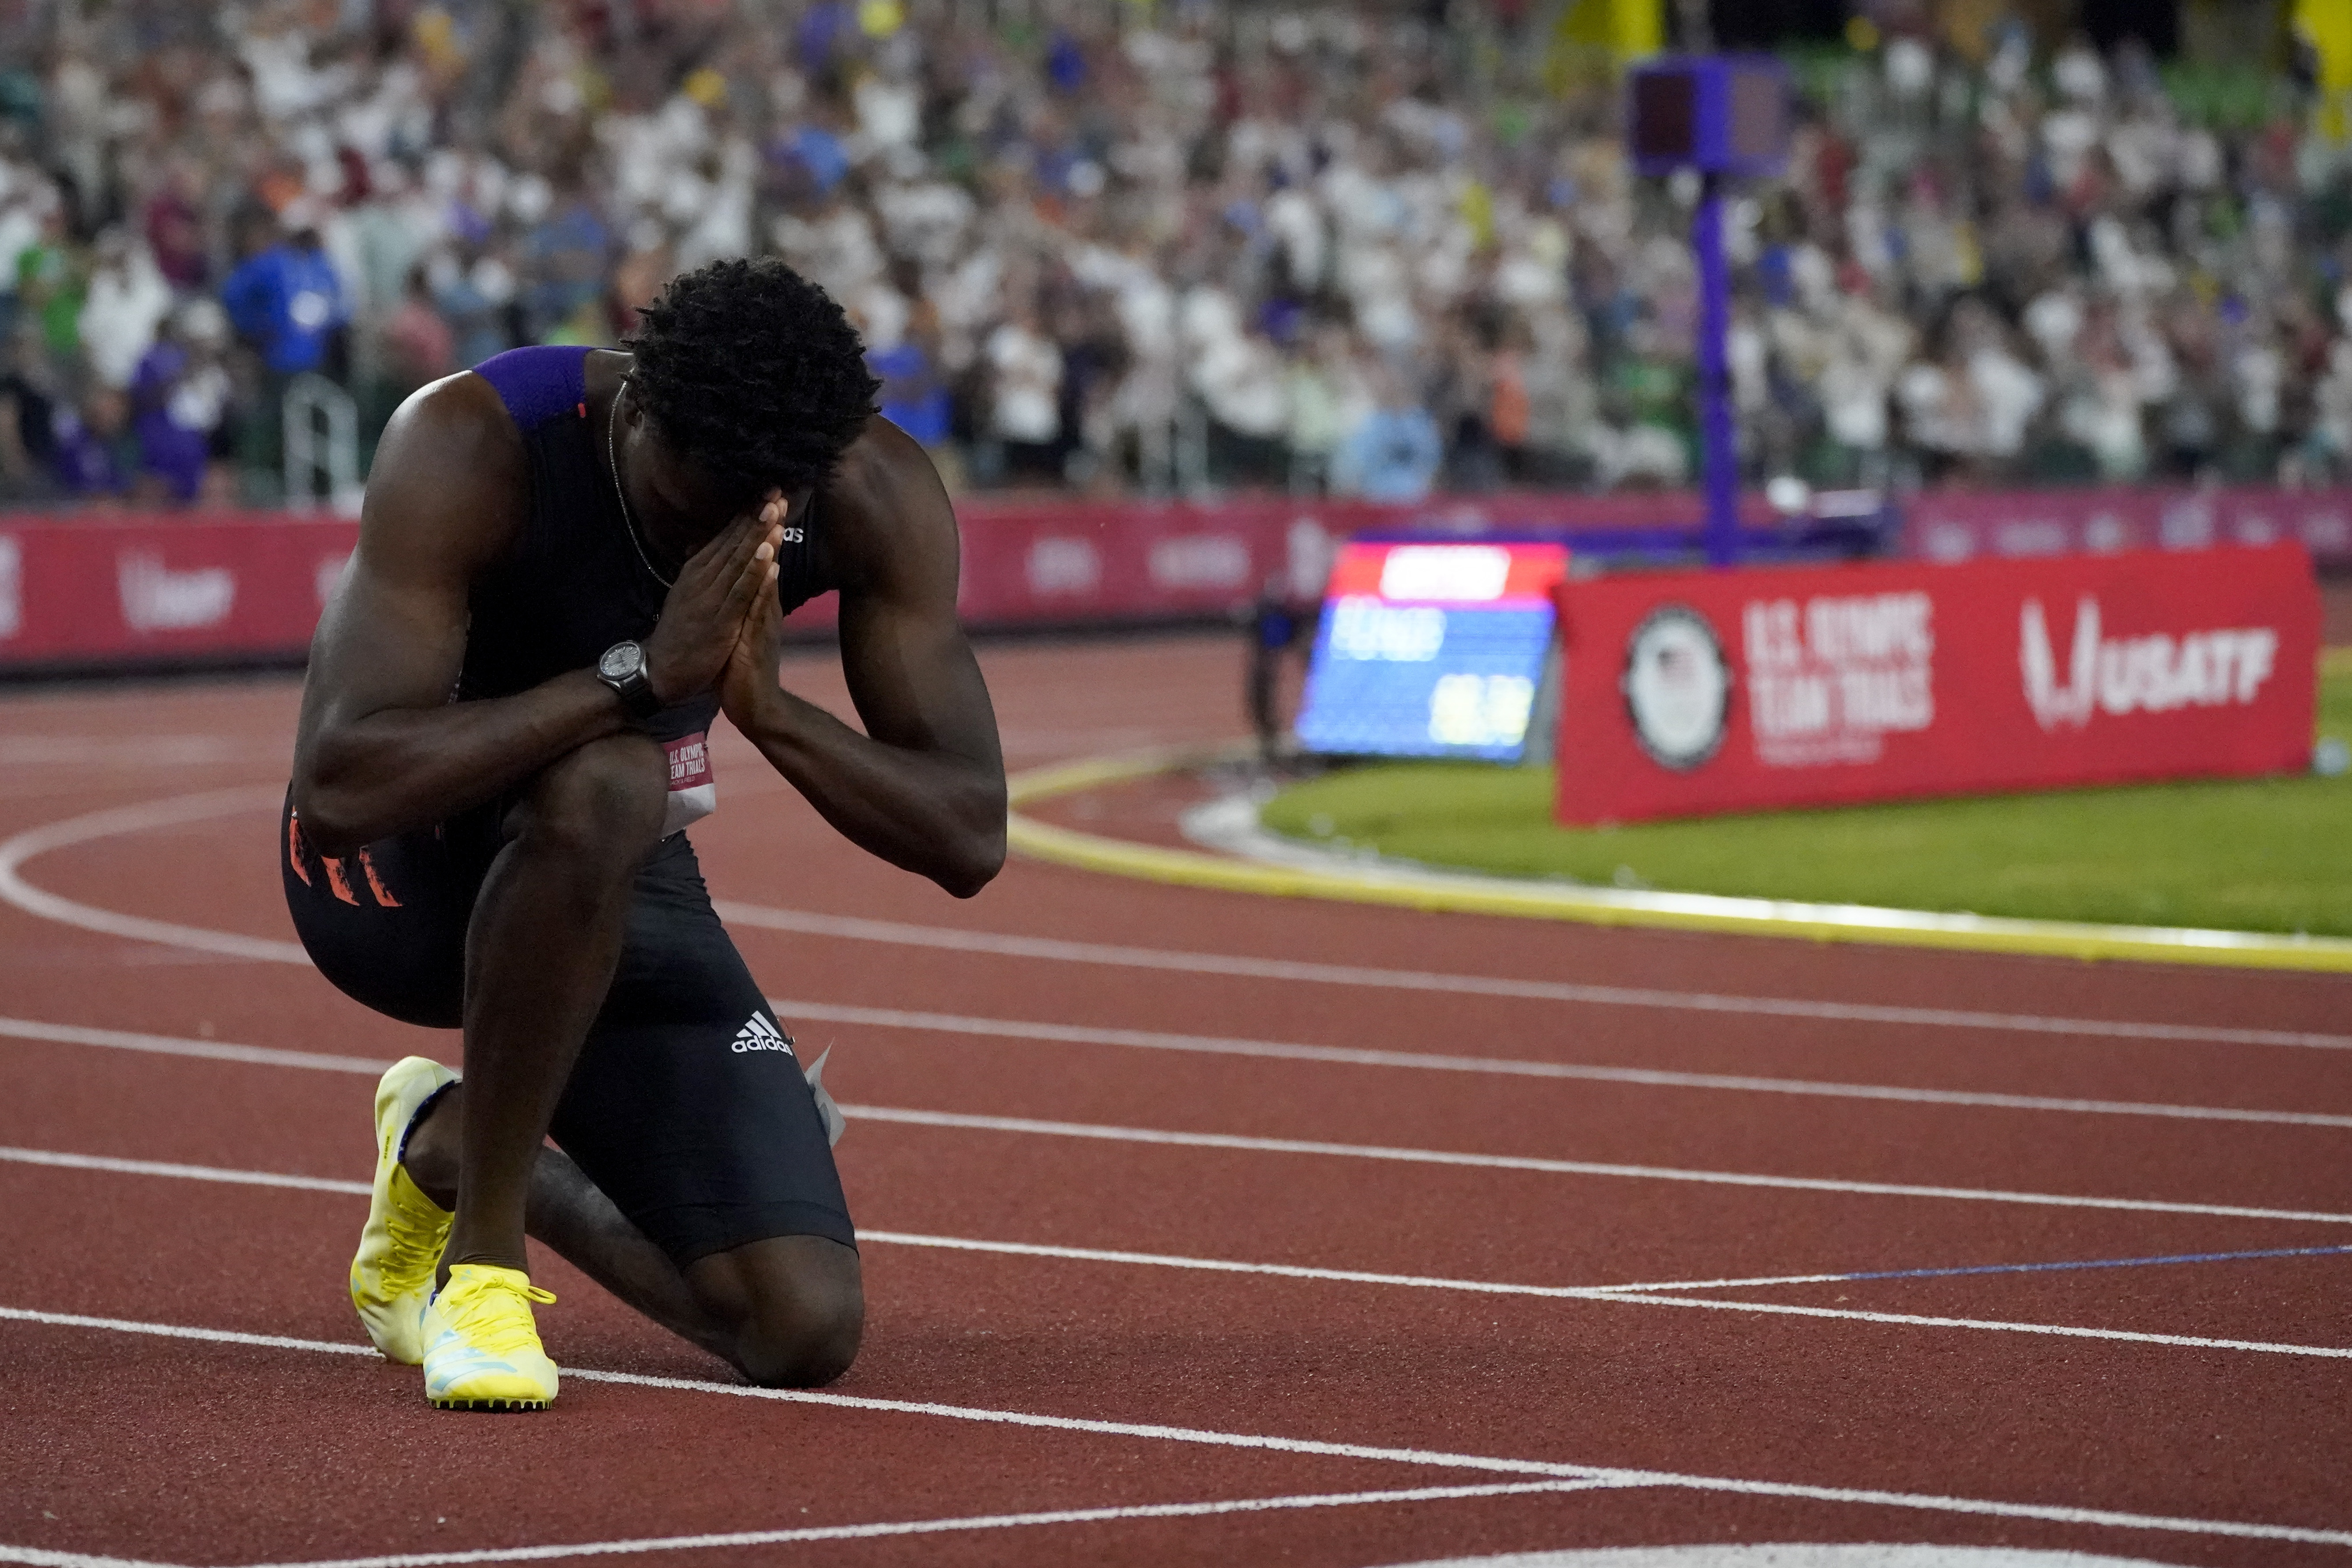 The Latest: Noah Lyles wins the 200, headed to Tokyo